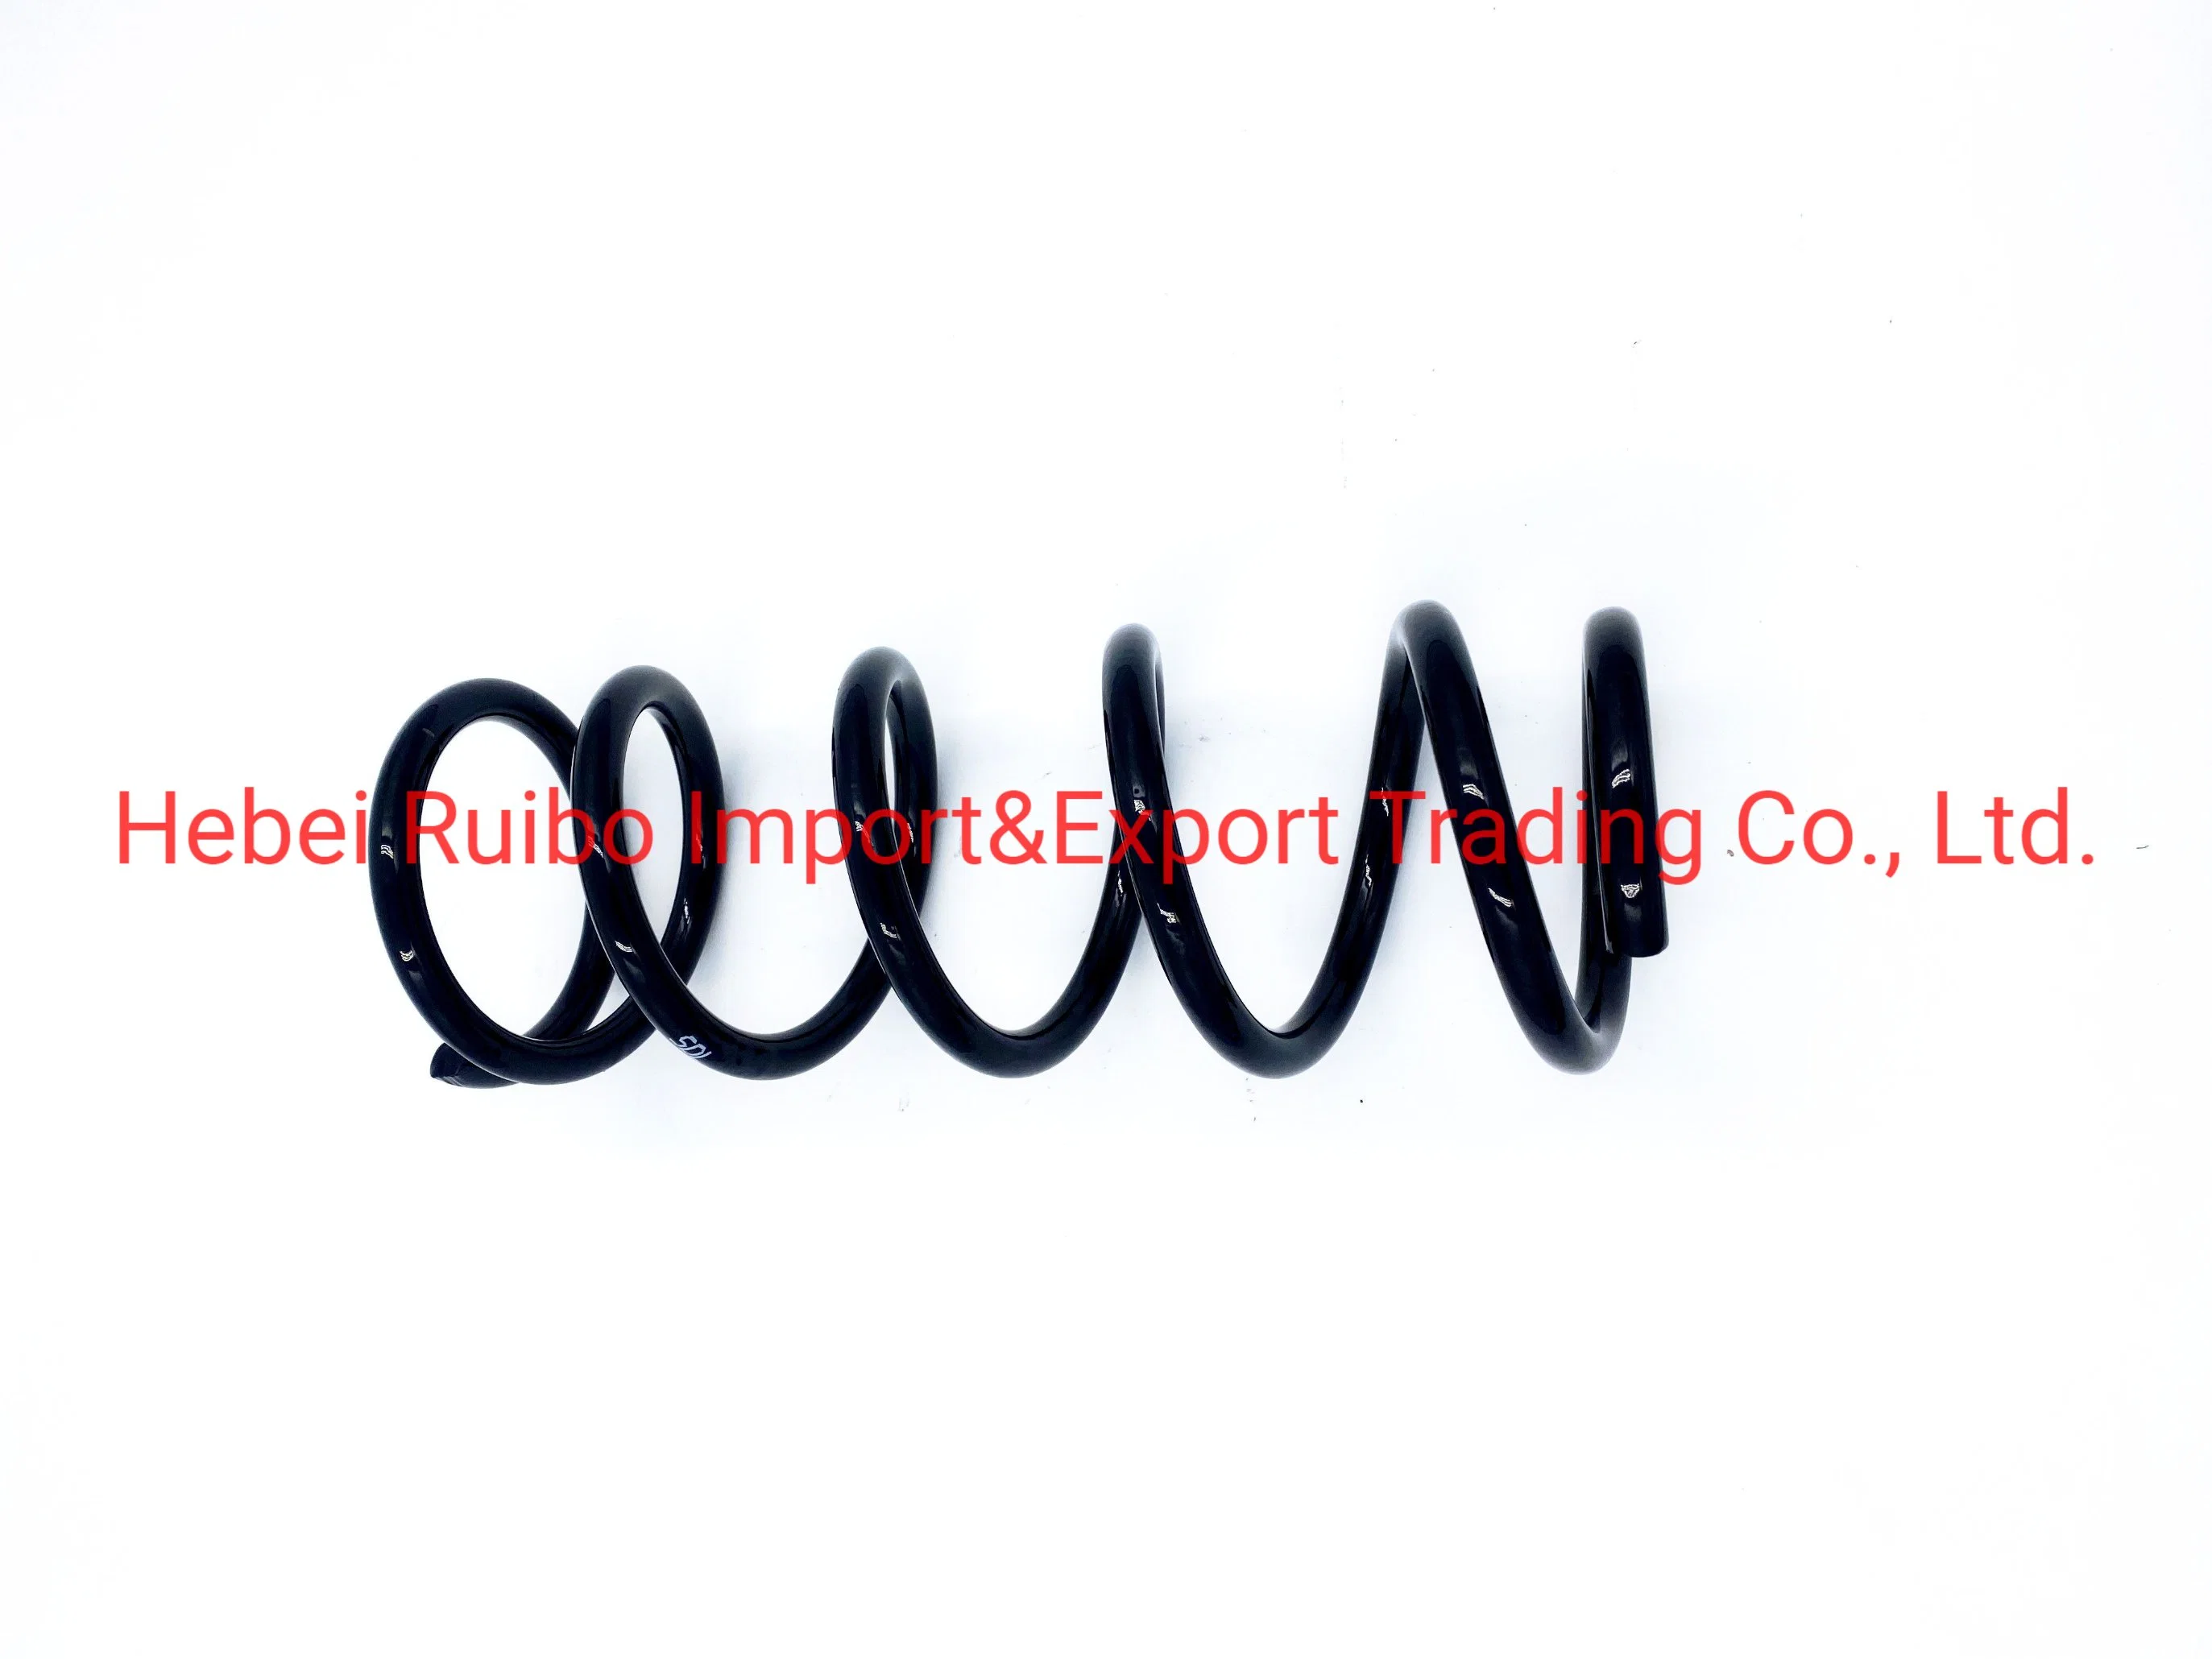 Spring Trap Forming Machine Rolls Motorcycle Front Shock Absorber Wire Pulling Oil Tempered Wire Suspension Coil Spring Almera N16 R Qg15 R 55020-Bn410